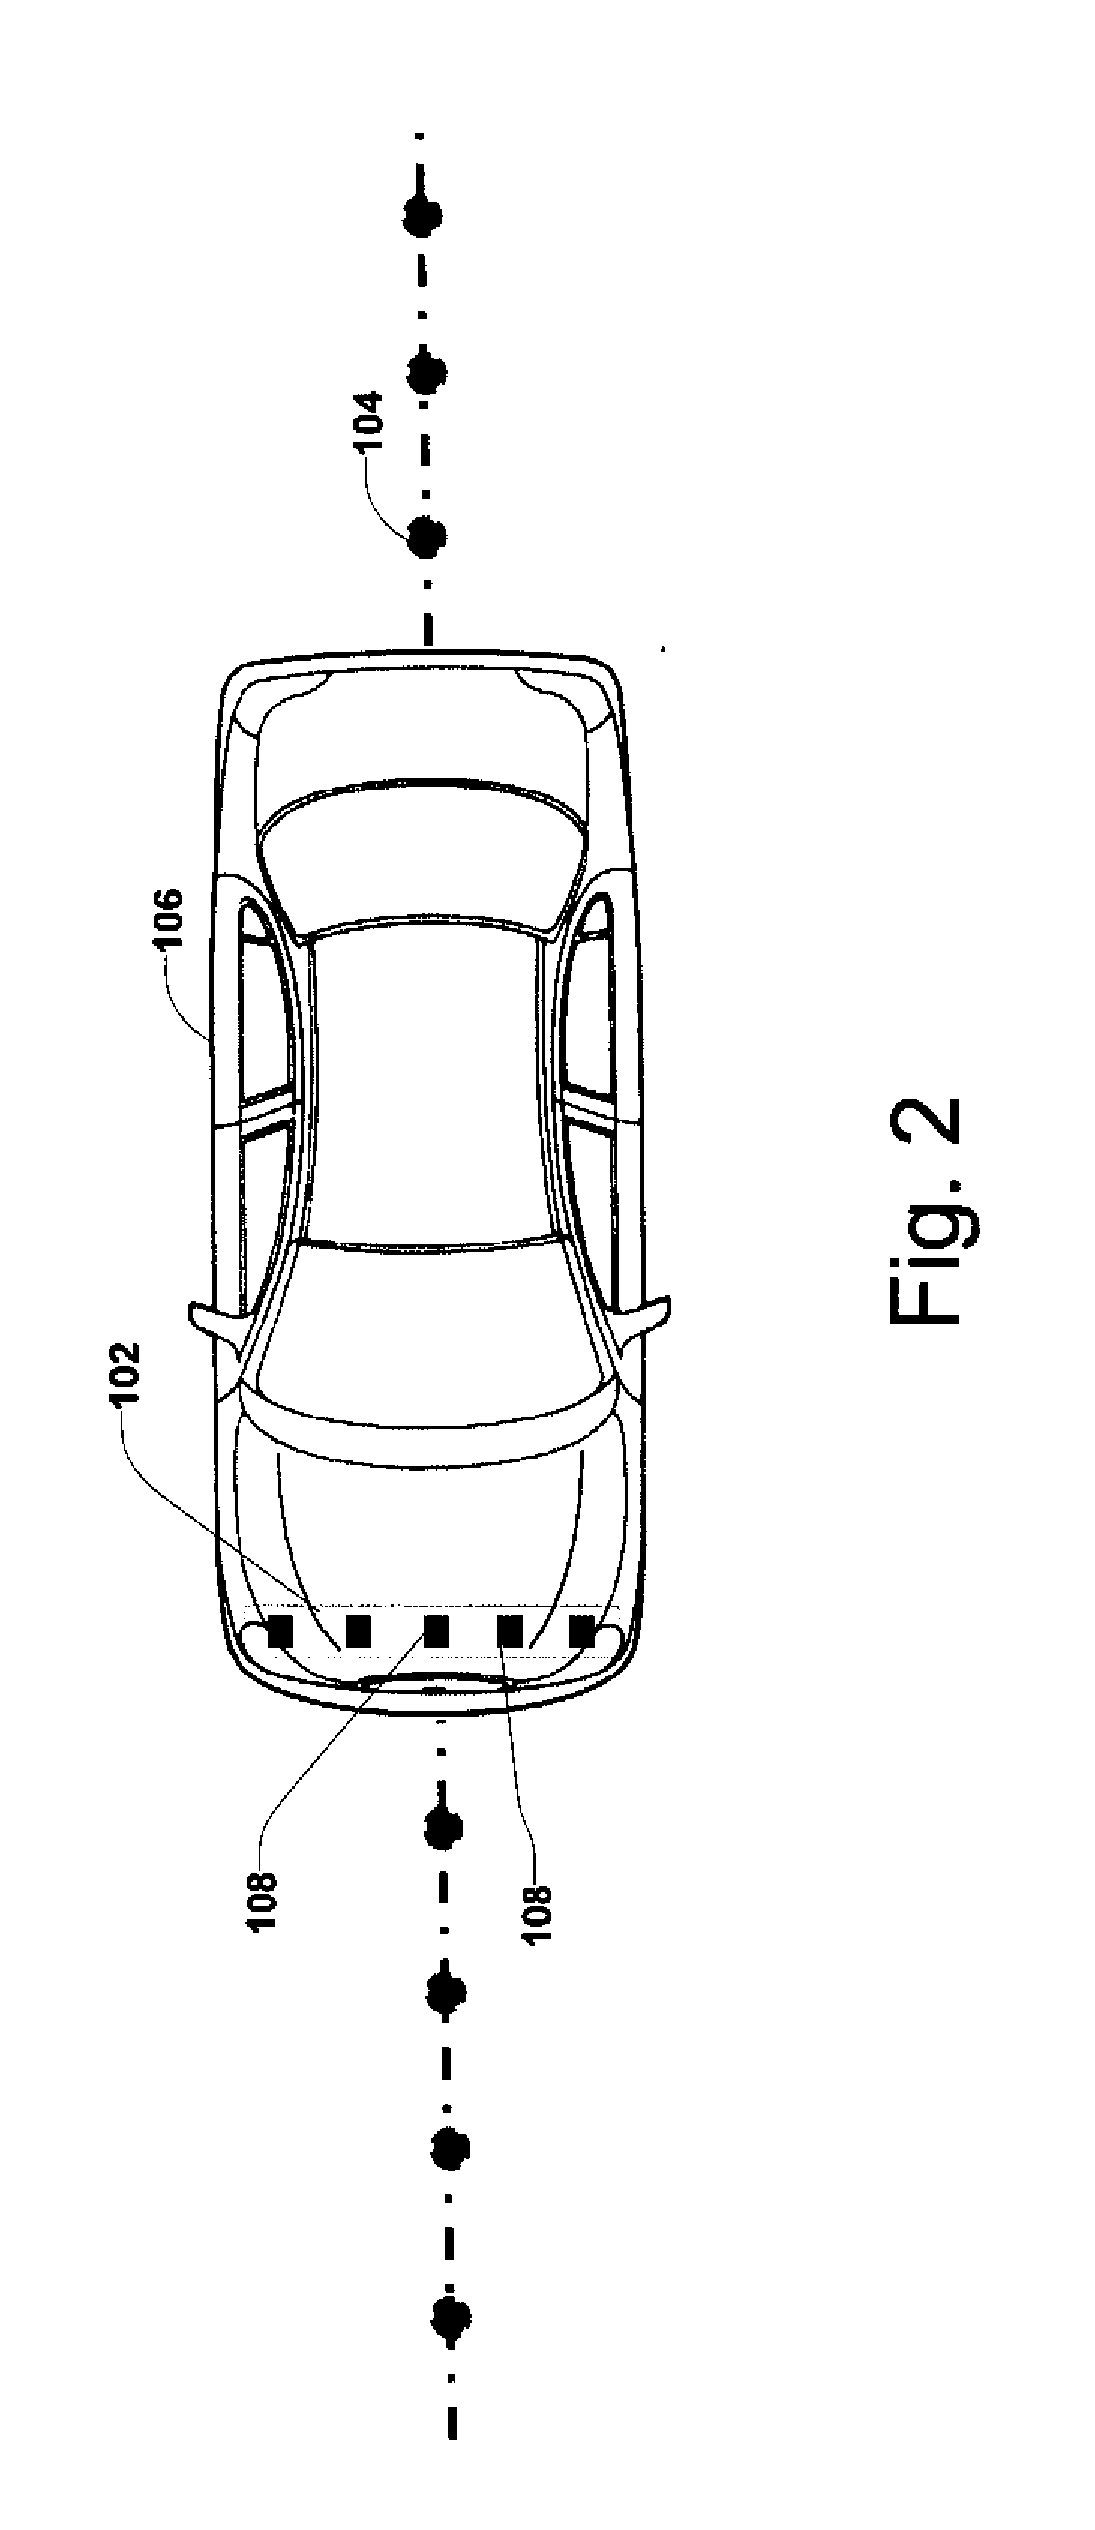 Position sensing system for intelligent vehicle guidance